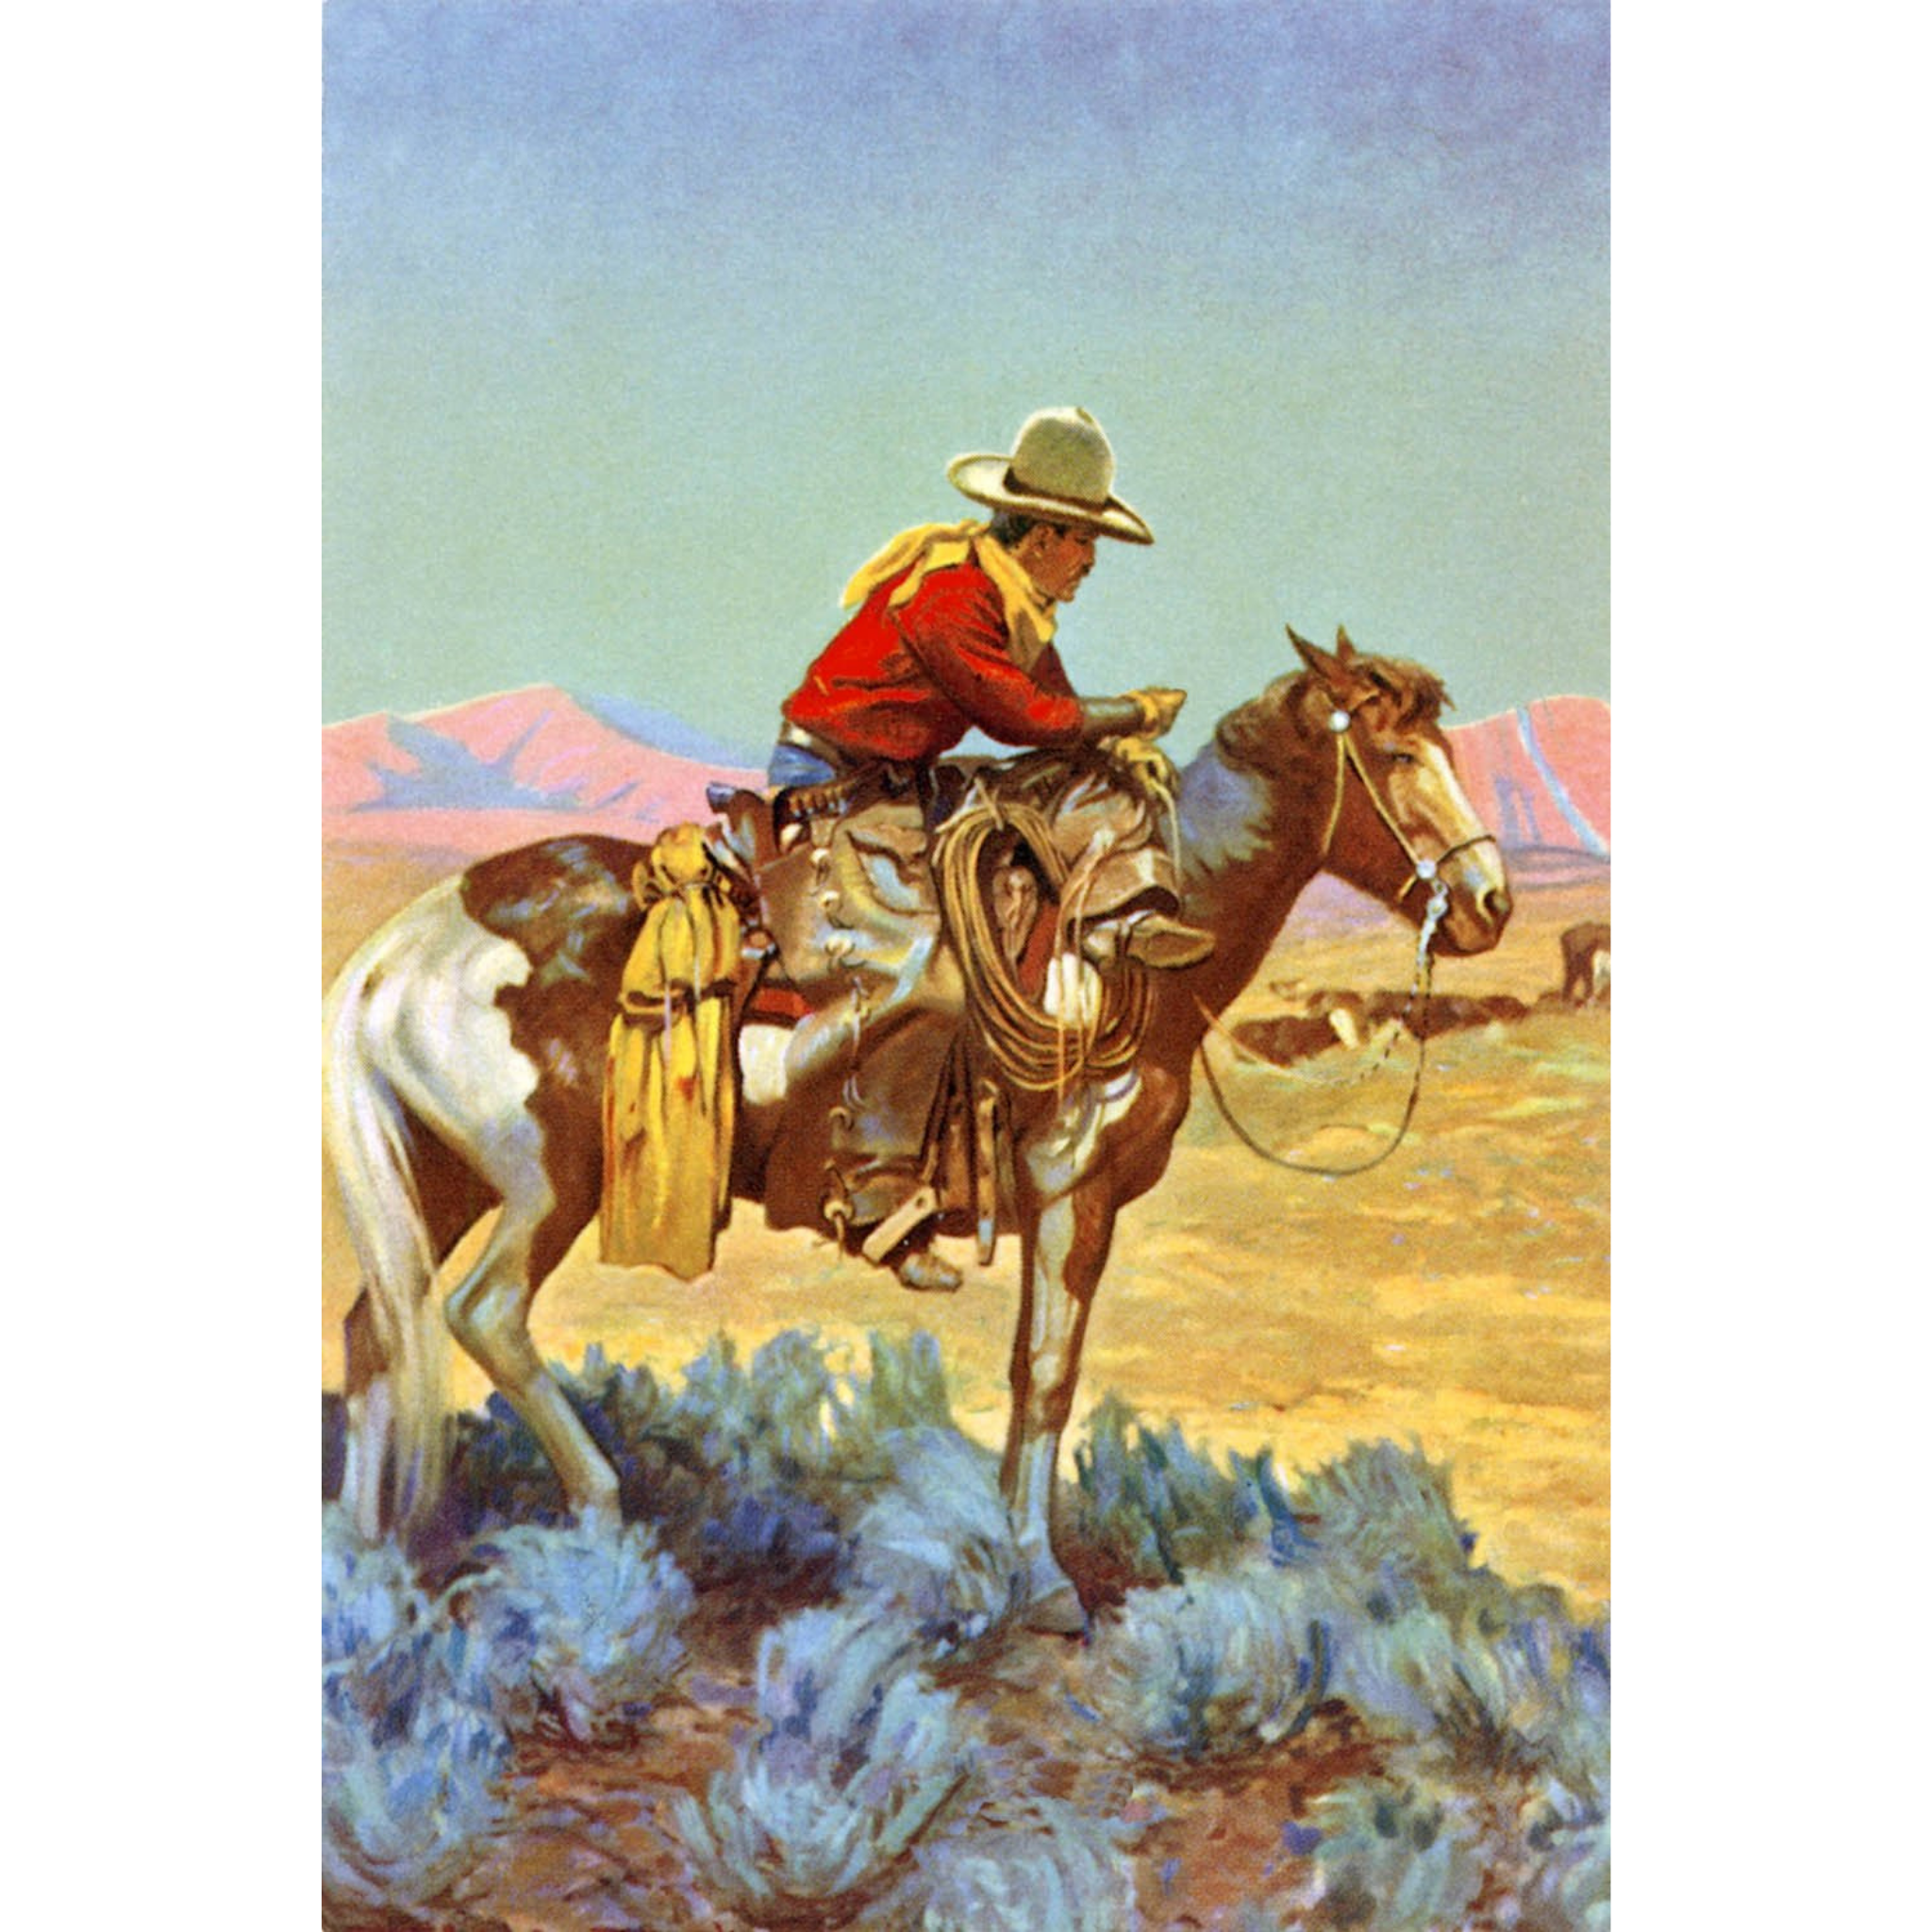 Cowboy on Horse - ca. 1930 Lithograph